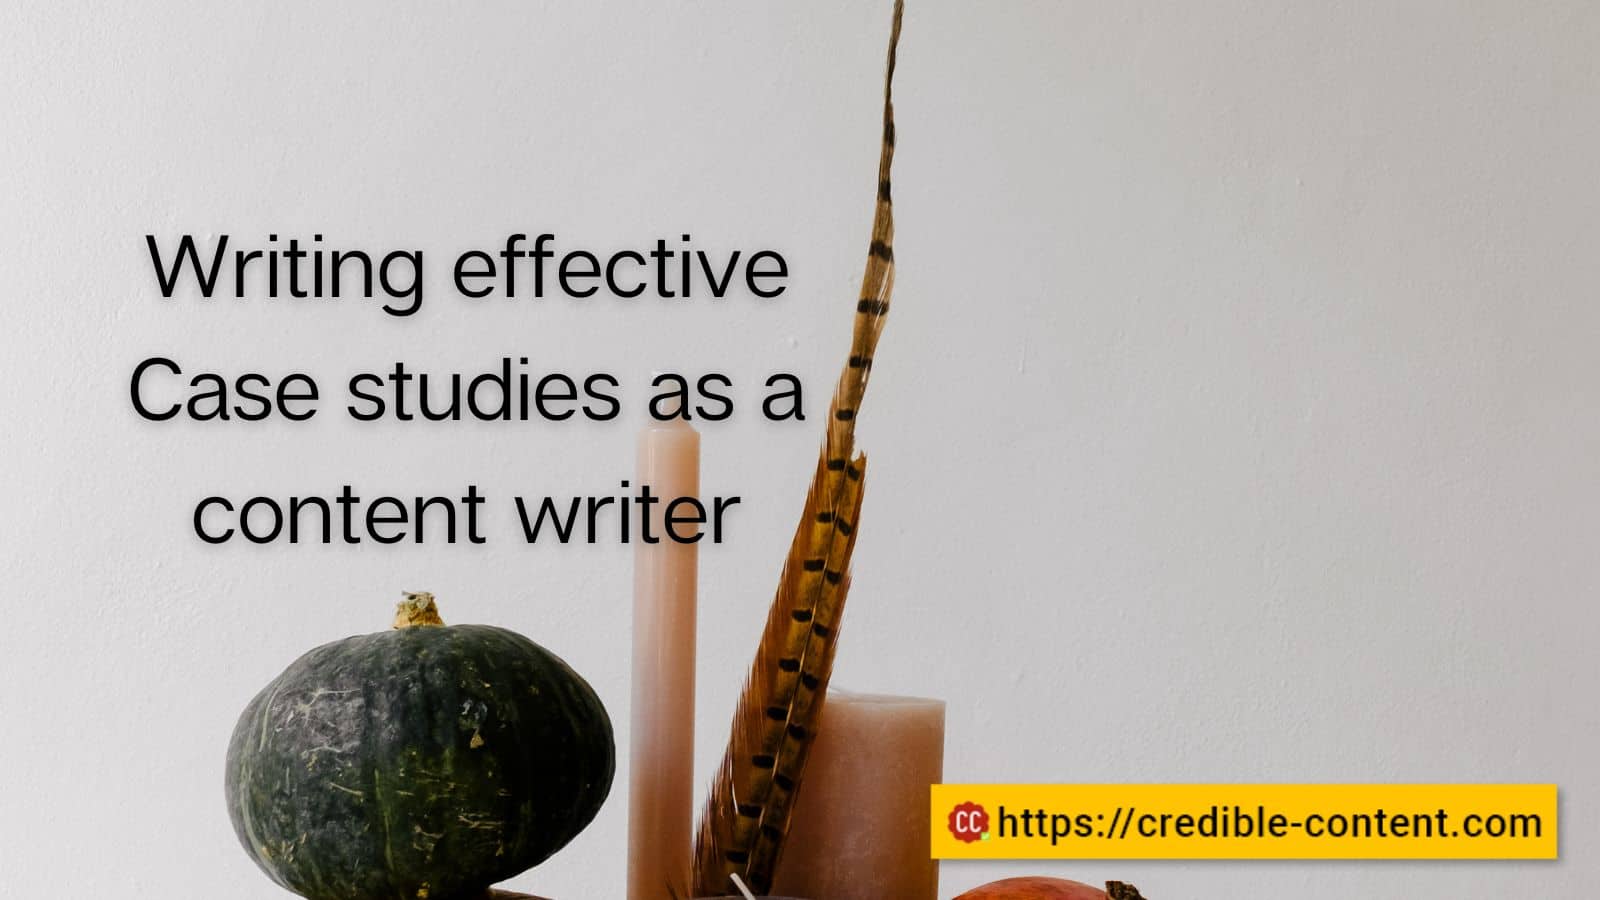 Writing effective case studies as a content writer